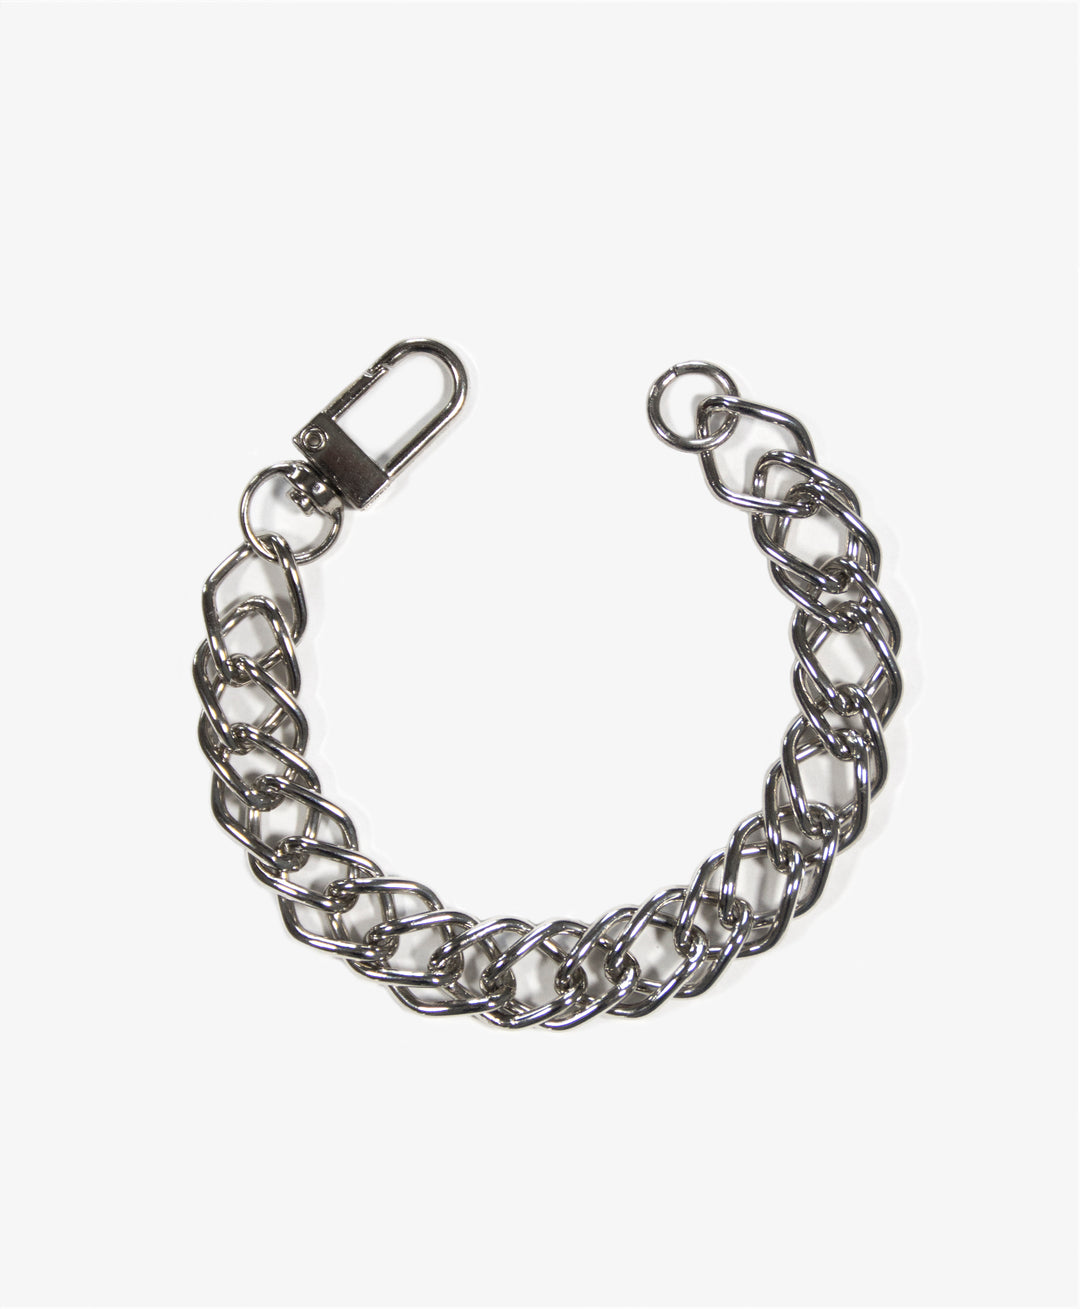 llayers-mens-women-jewelry-silver-stainlesssteel-chain-bracelet-unchained-001-1-New-York